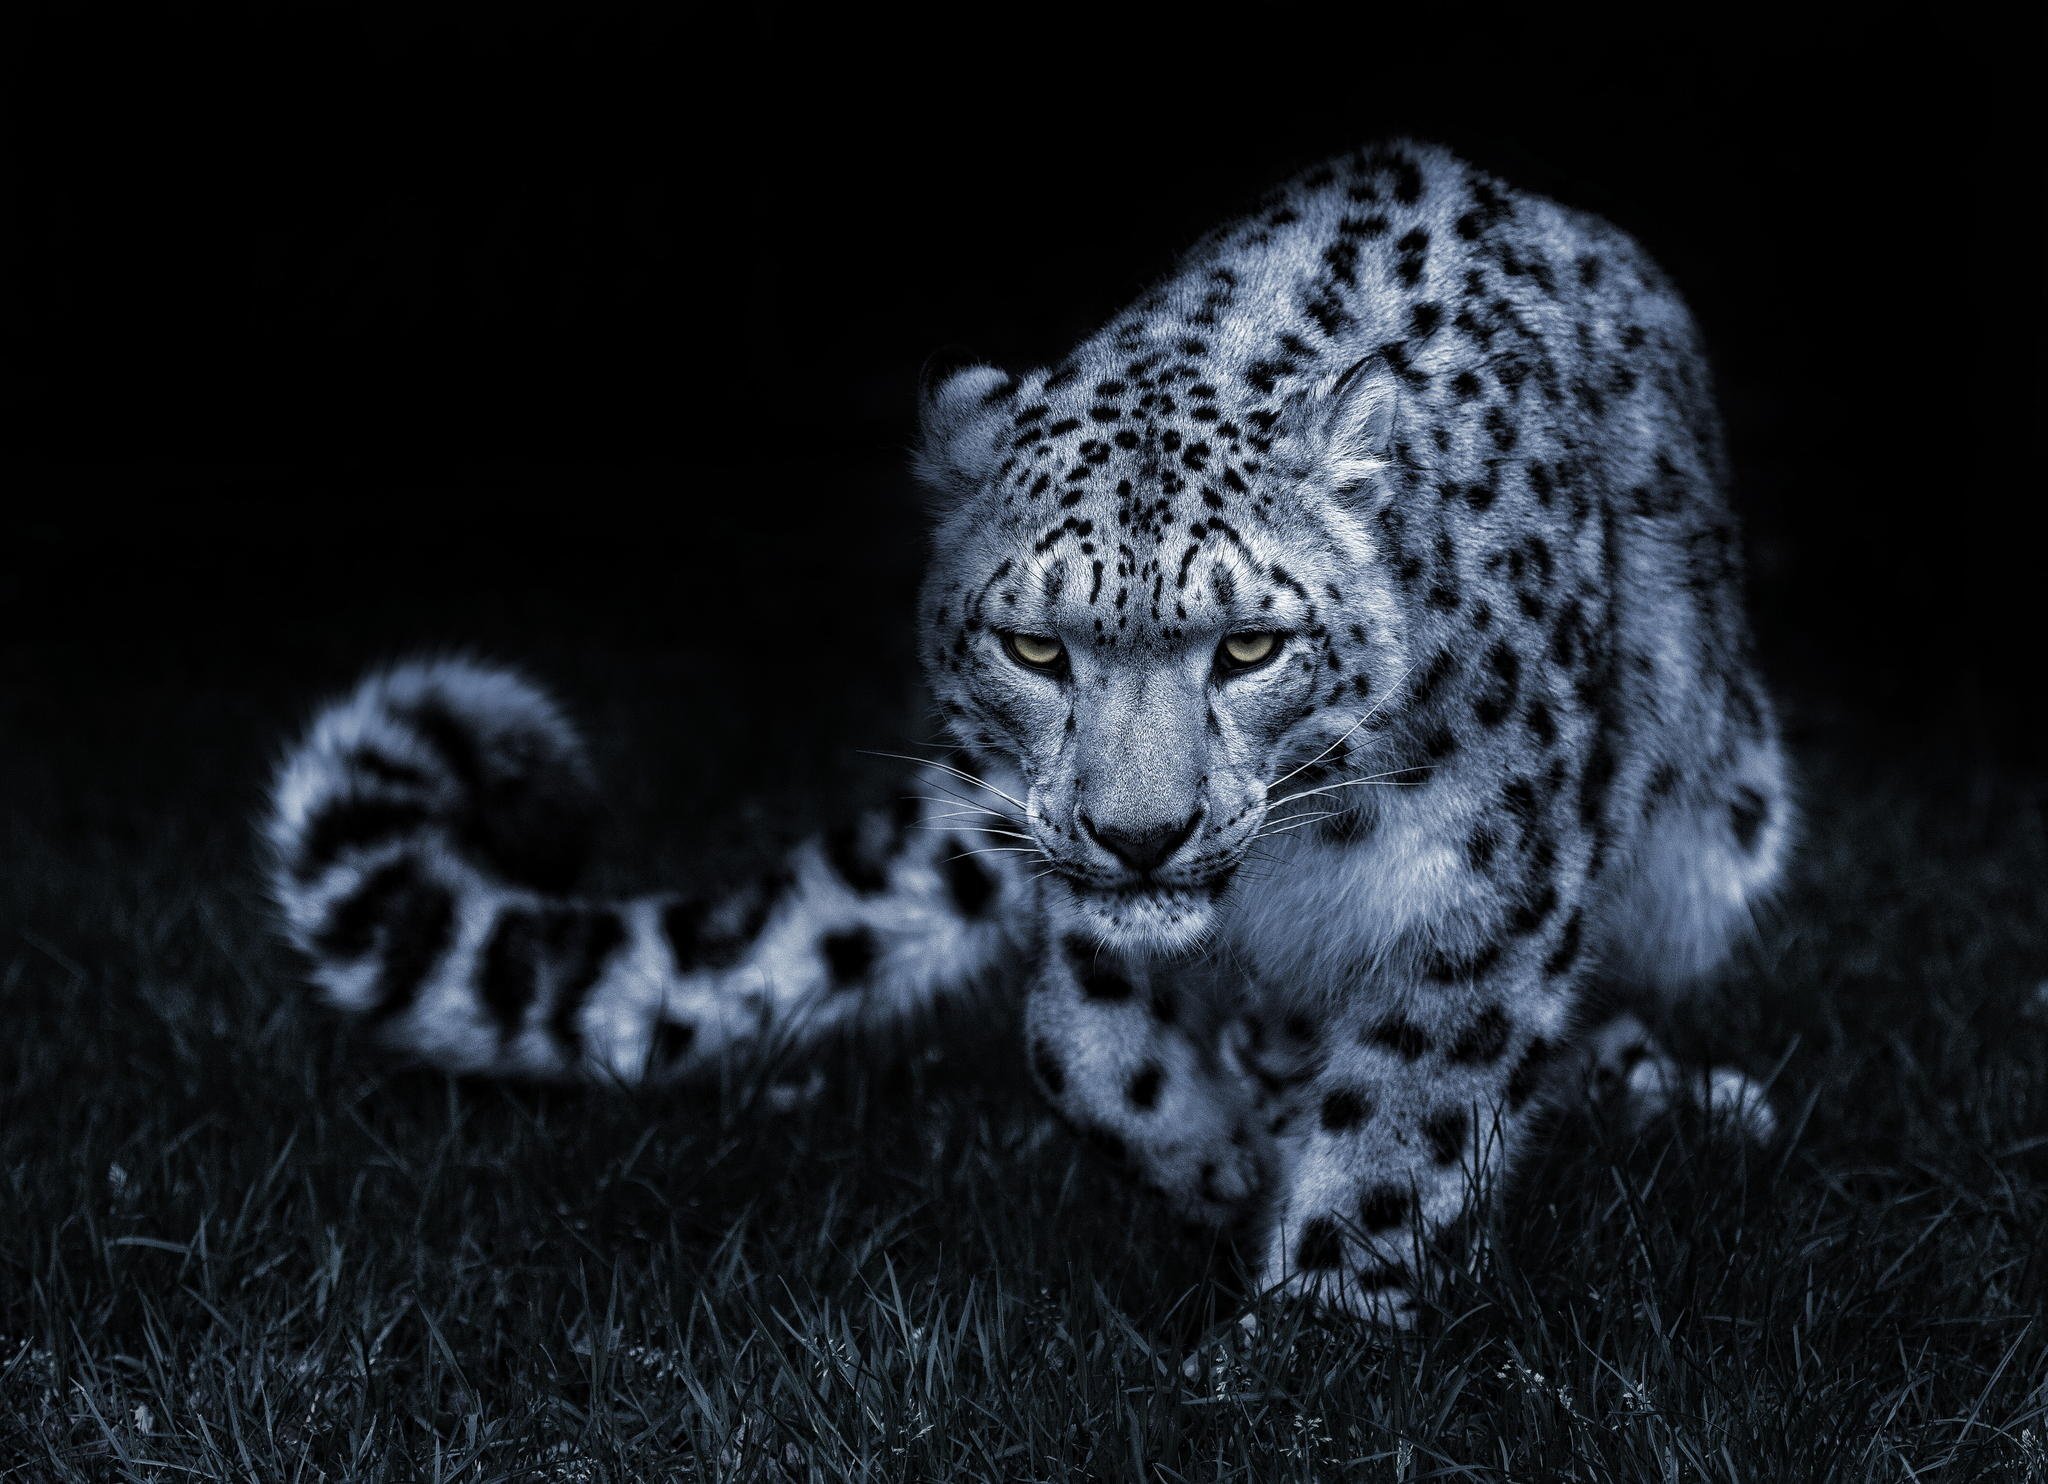 Snow Leopard Black And White Posture Eyes Cat Wallpaper Background